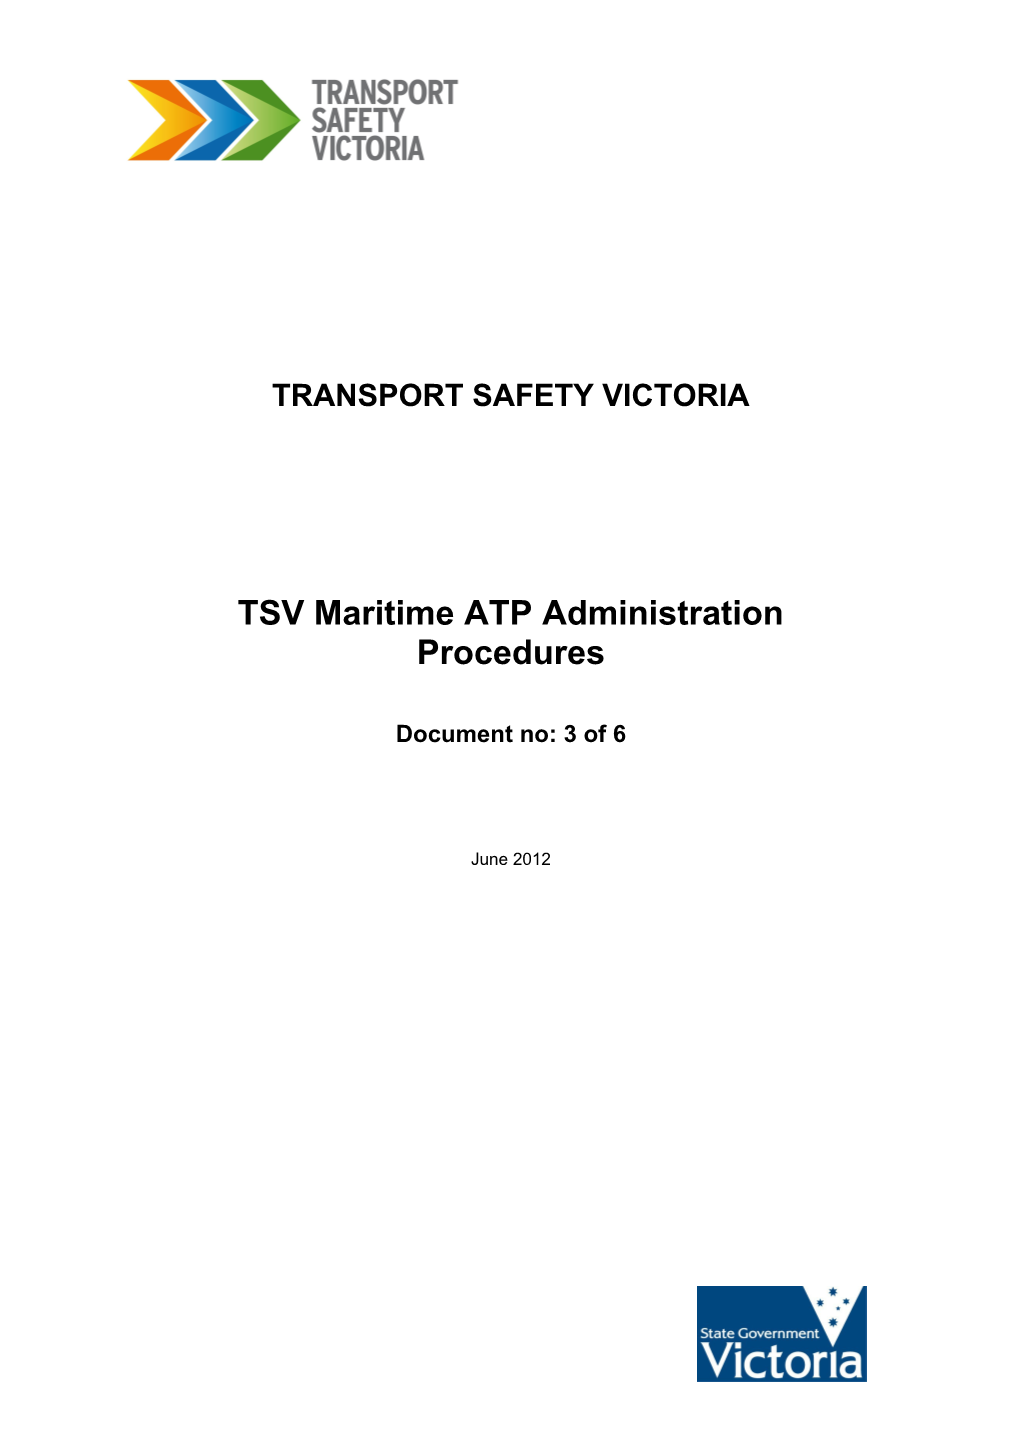 Msv Recreational Boat Operator Training Advertising and Marketing Guideline